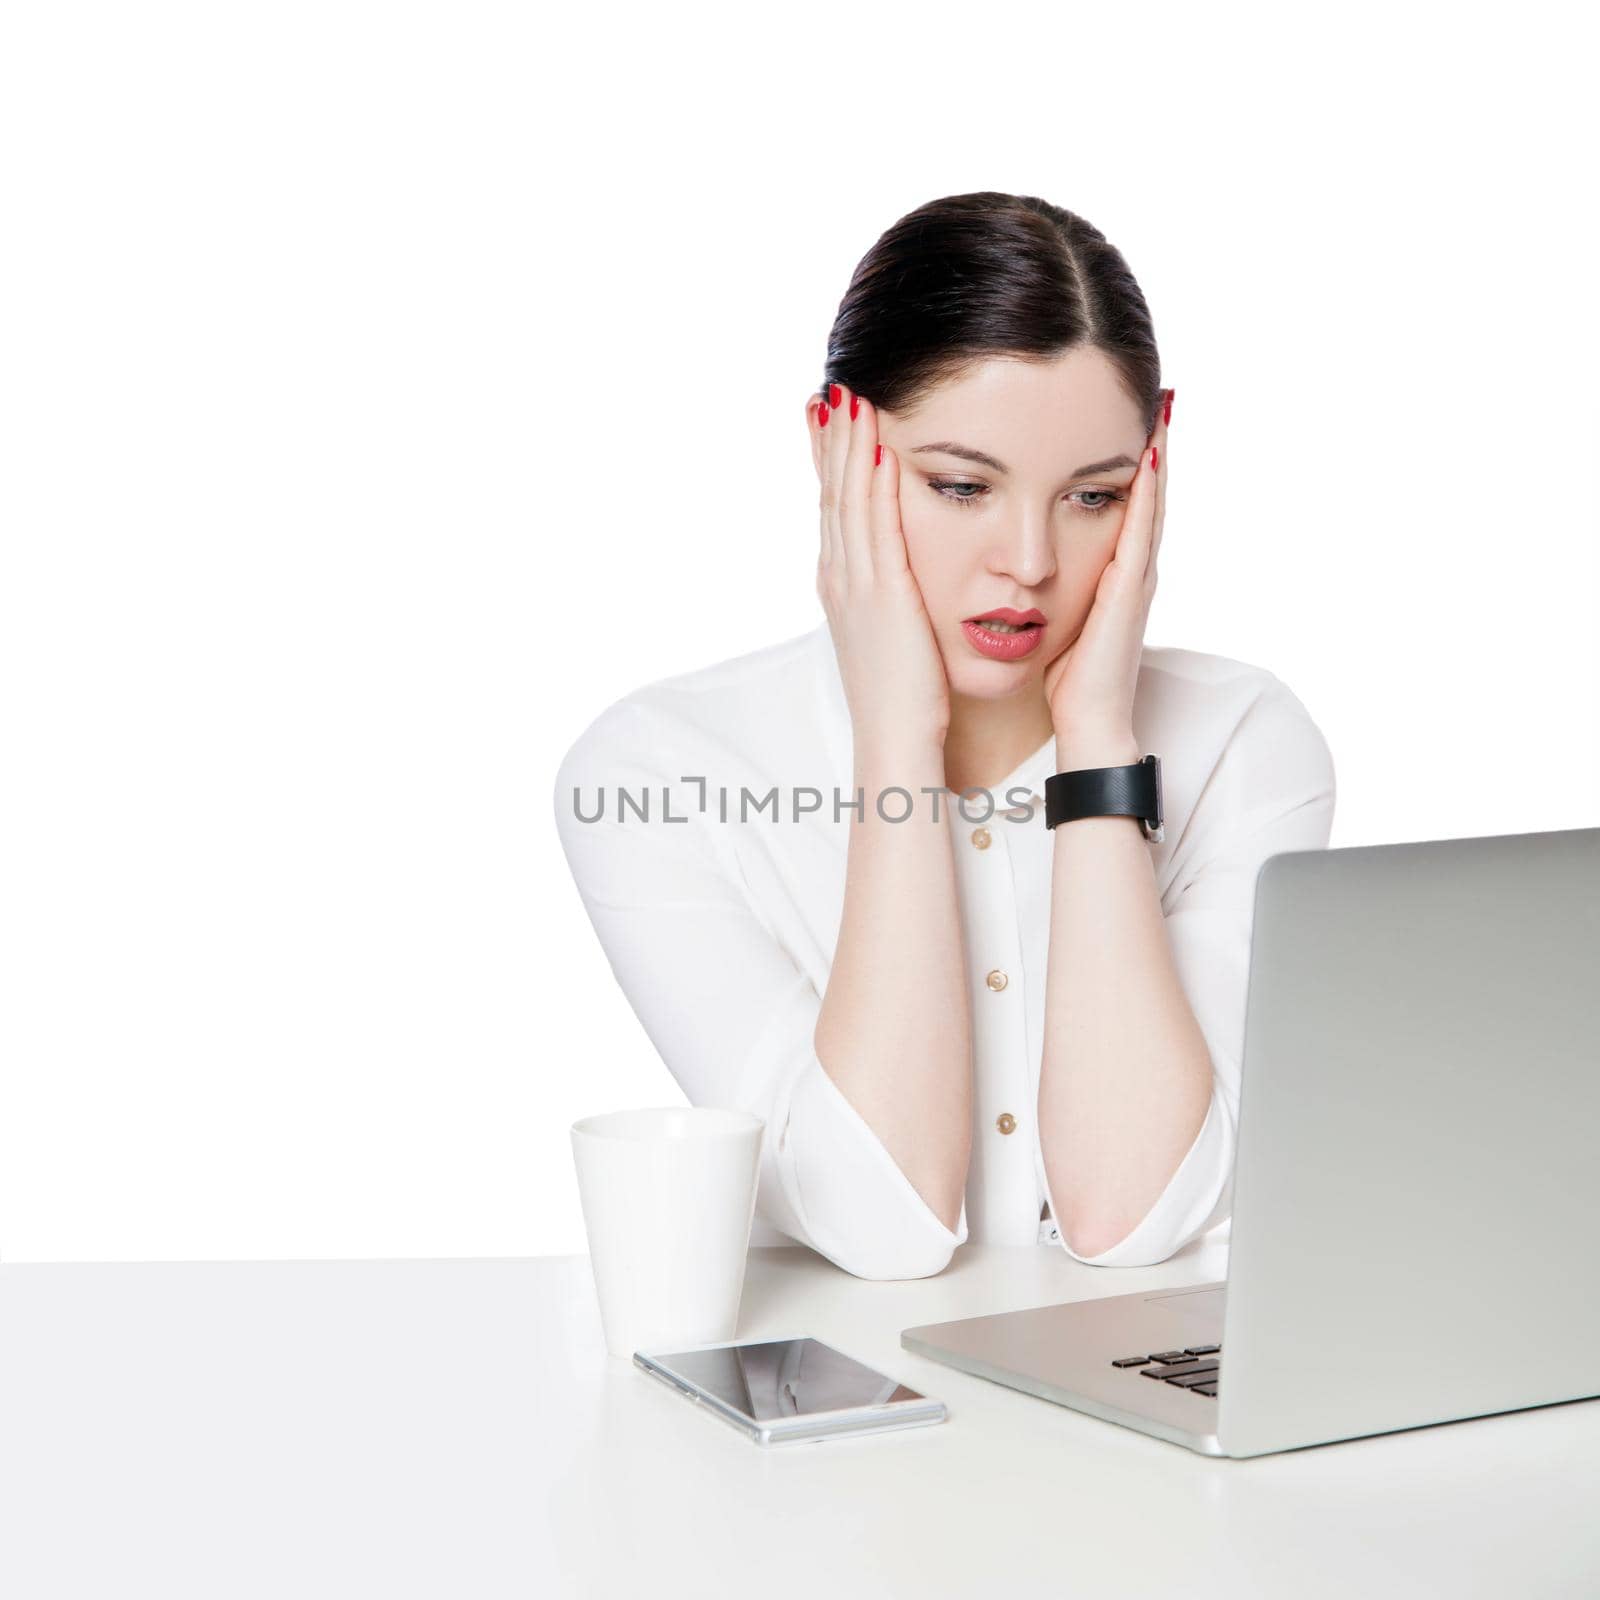 Portrait of shocked attractive brunette businesswoman in white shirt sitting looking at laptop display, reading unbelievable news and confused. indoor studio shot, isolated in white background.